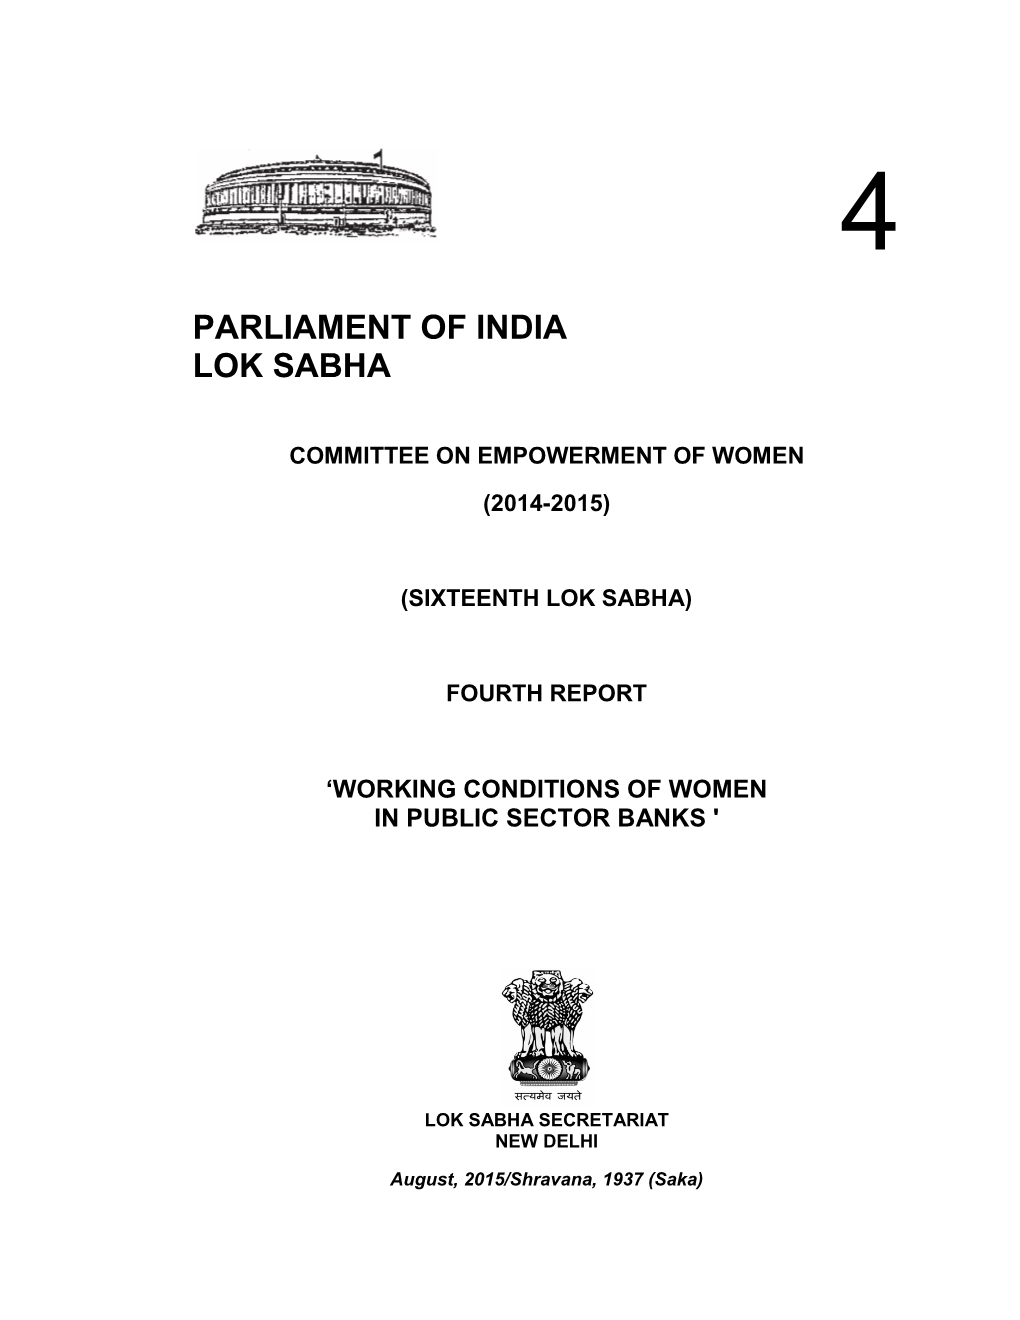 Working Conditions of Women in Public Sector Banks '